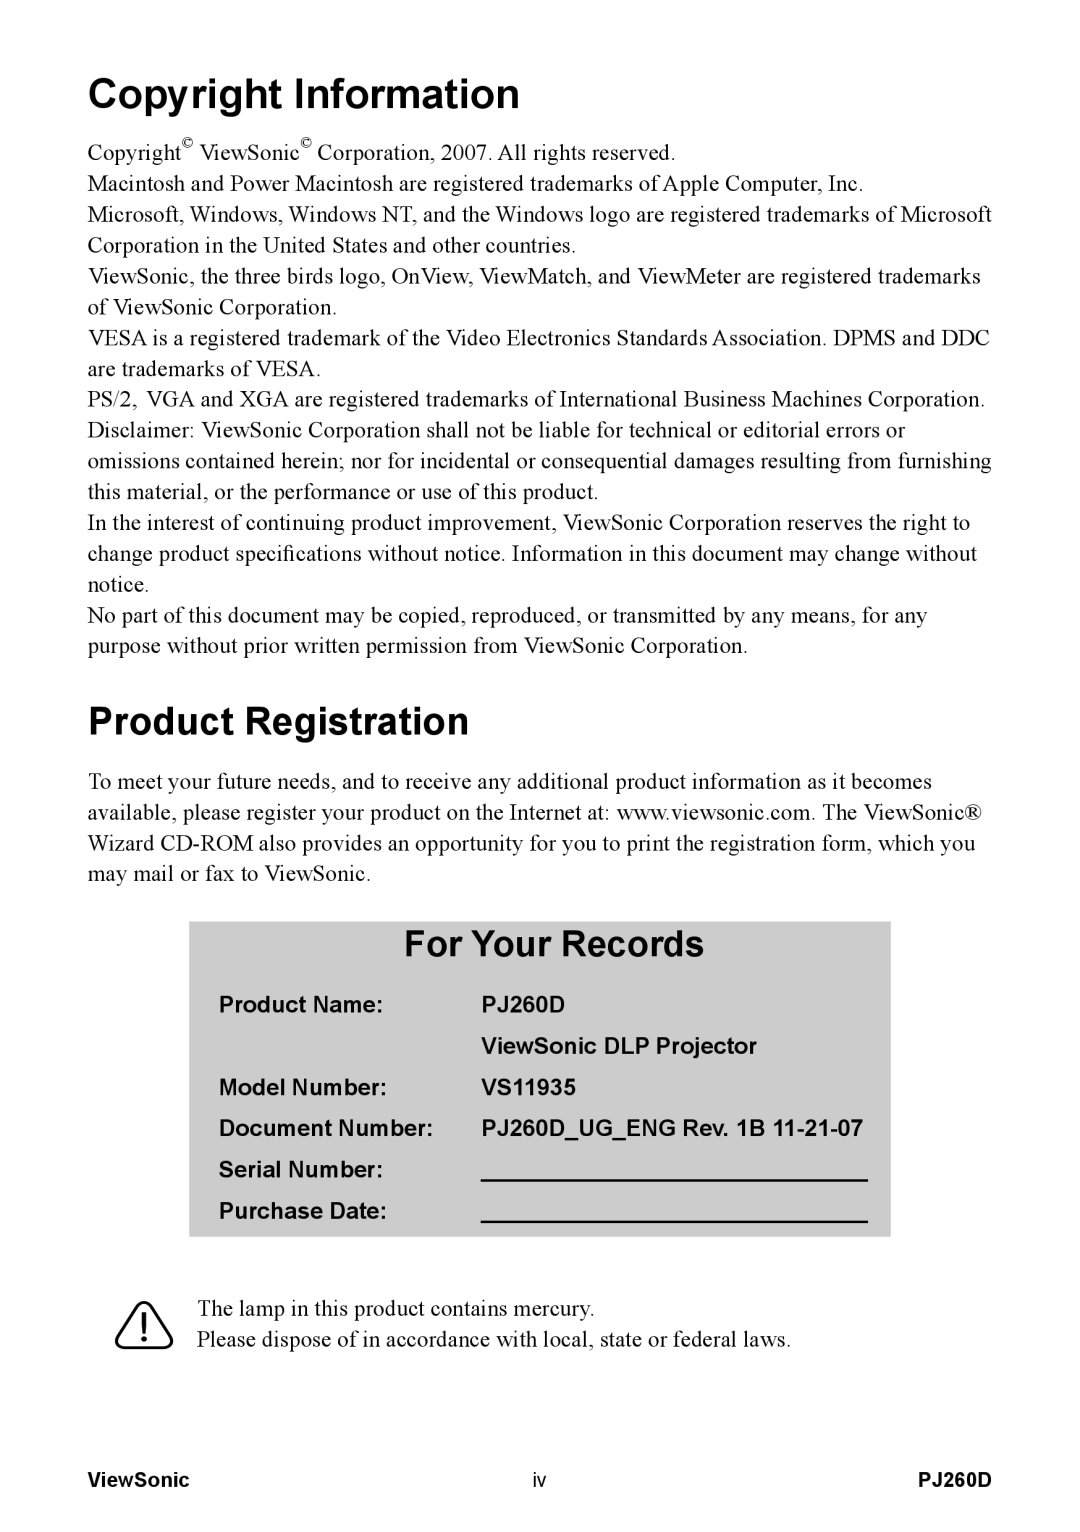 ViewSonic VS11935 Product Registration, Product Name, PJ260D, ViewSonic DLP Projector, Model Number, Document Number 